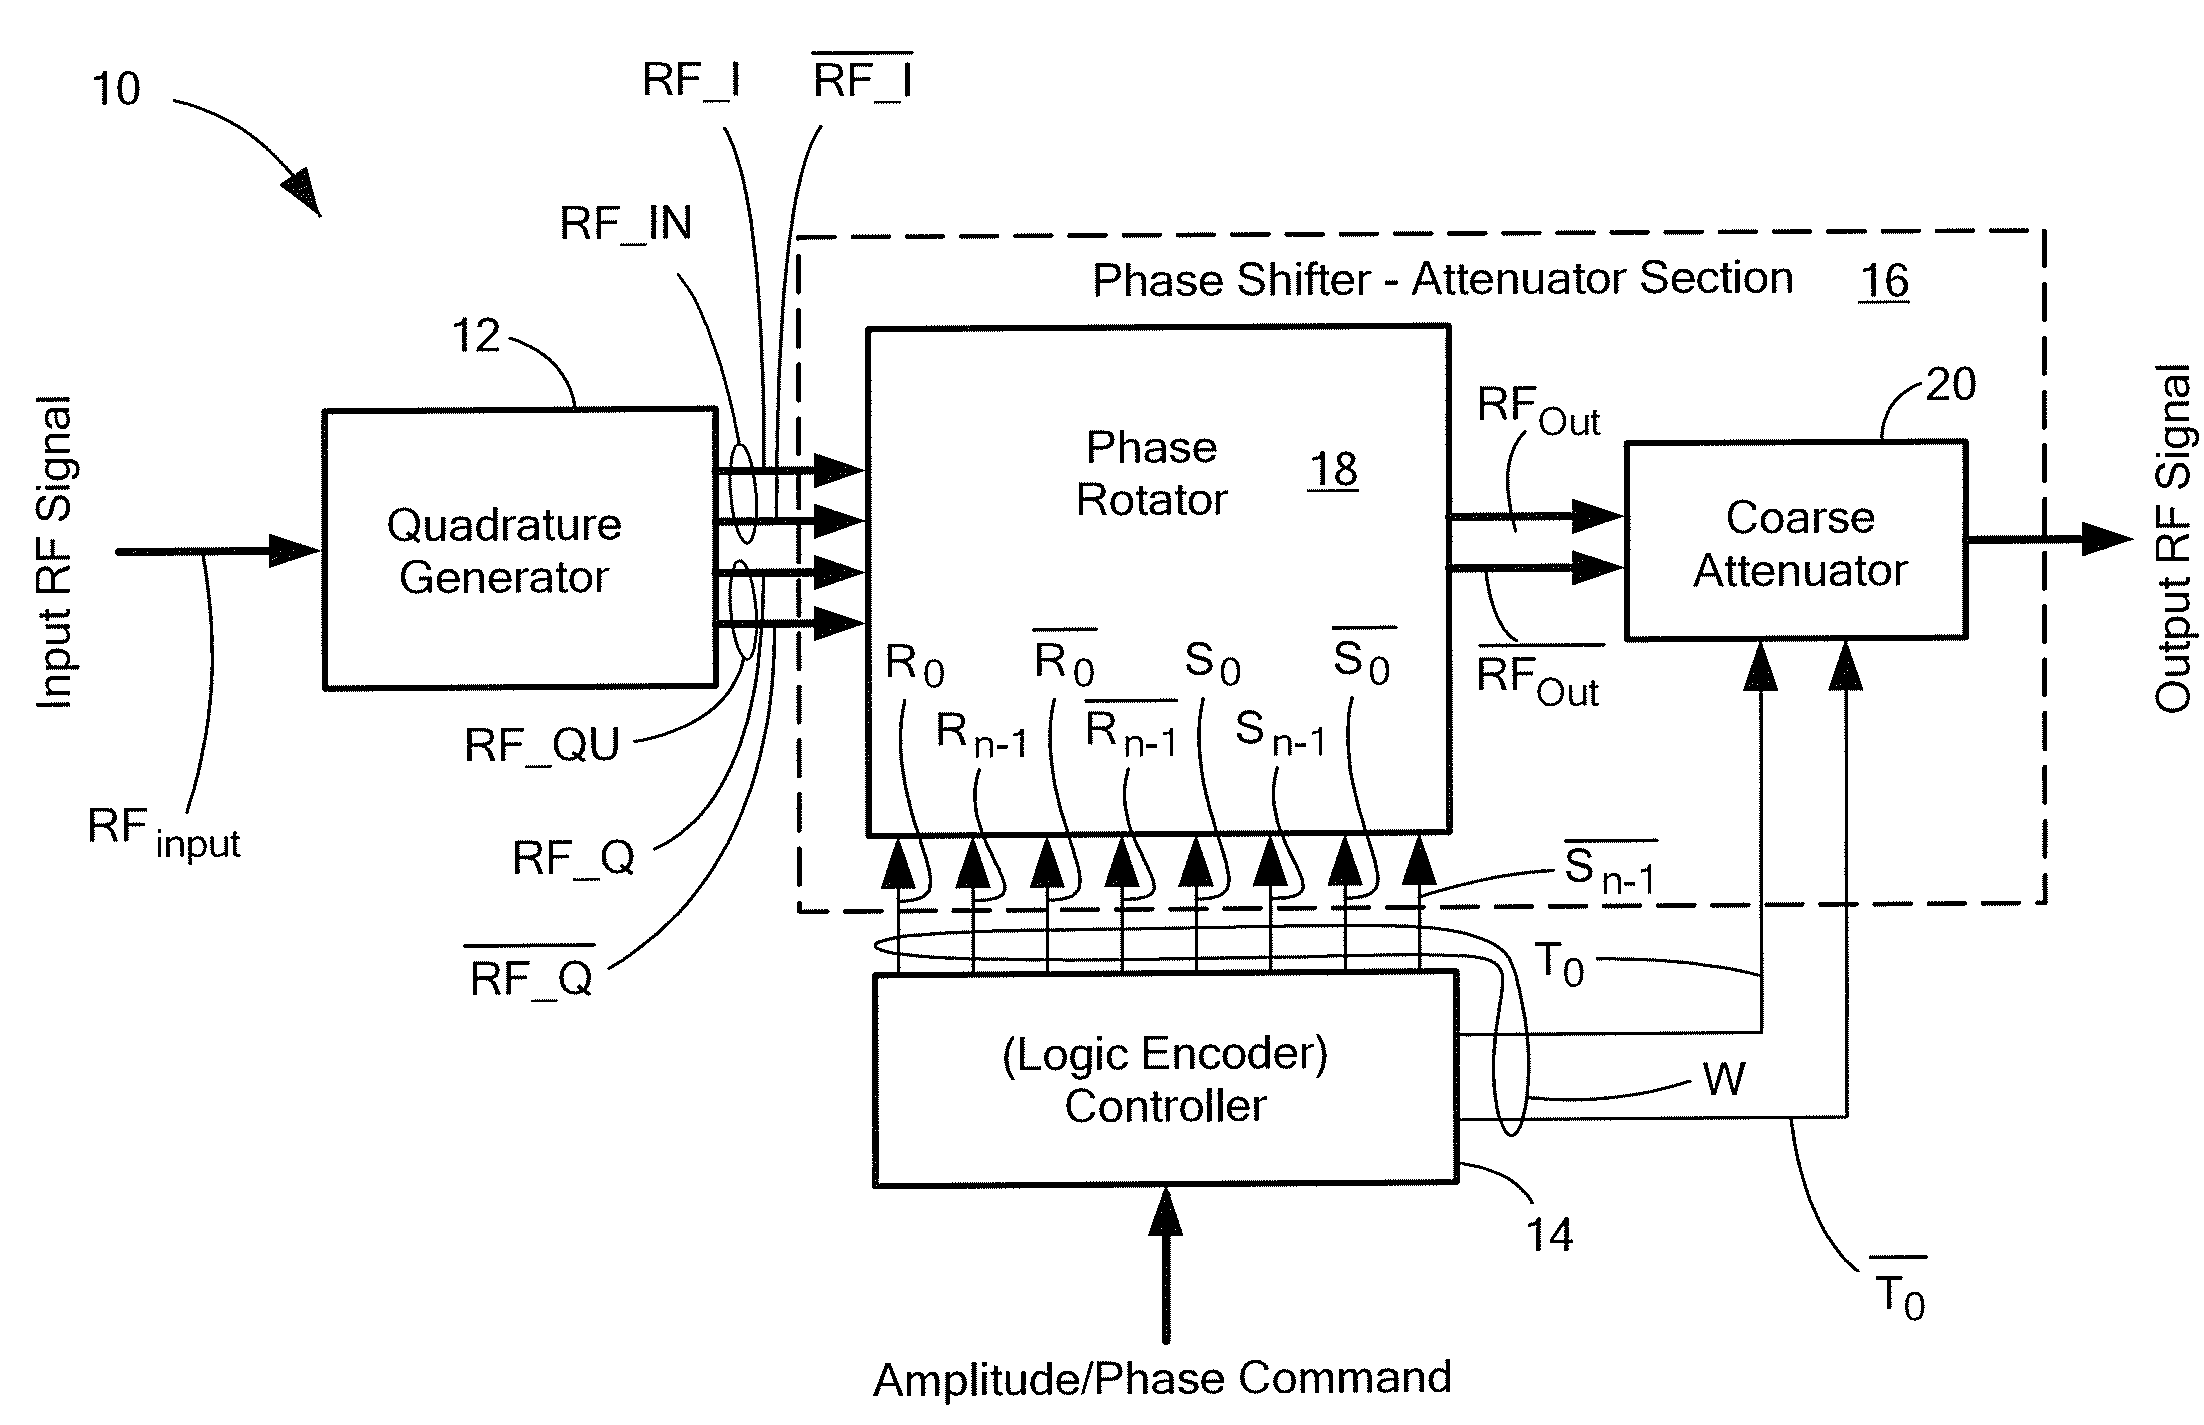 Variable phase shifter-attenuator